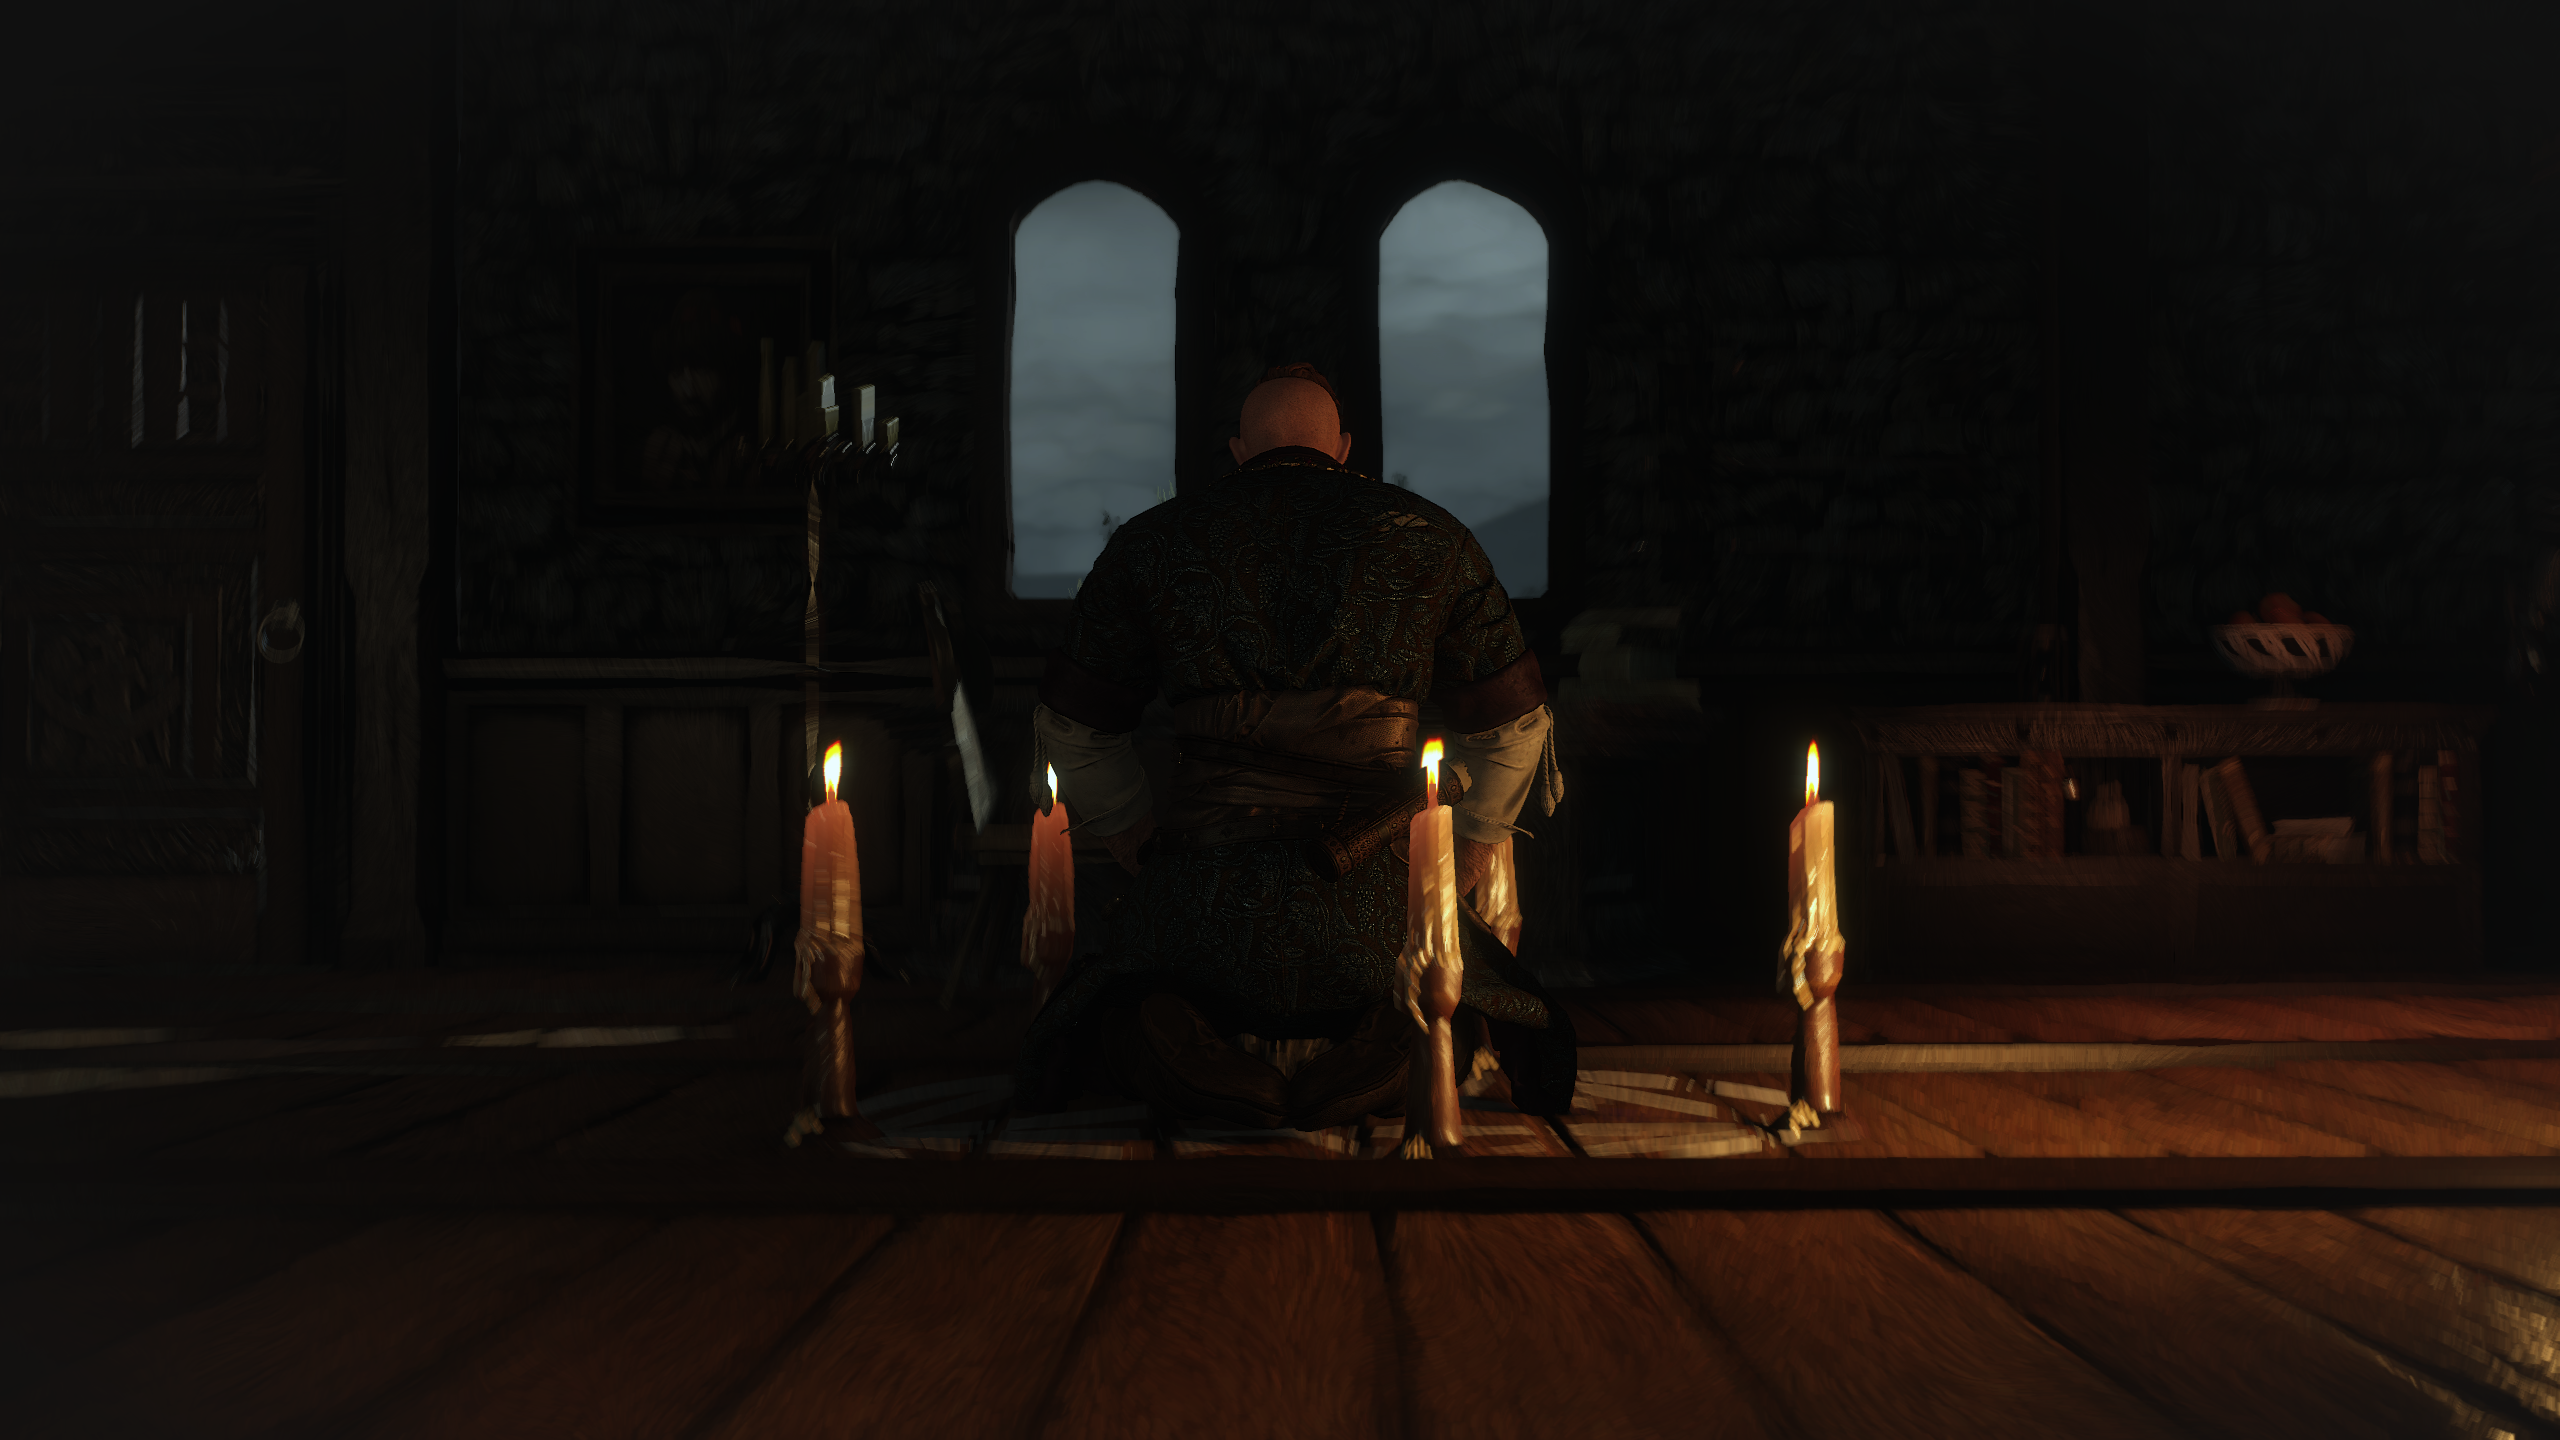 General 2560x1440 The Witcher 3: Wild Hunt Olgierd von Everec The Witcher 3: Wild Hunt – Hearts of Stone screen shot RPG video games PC gaming candles